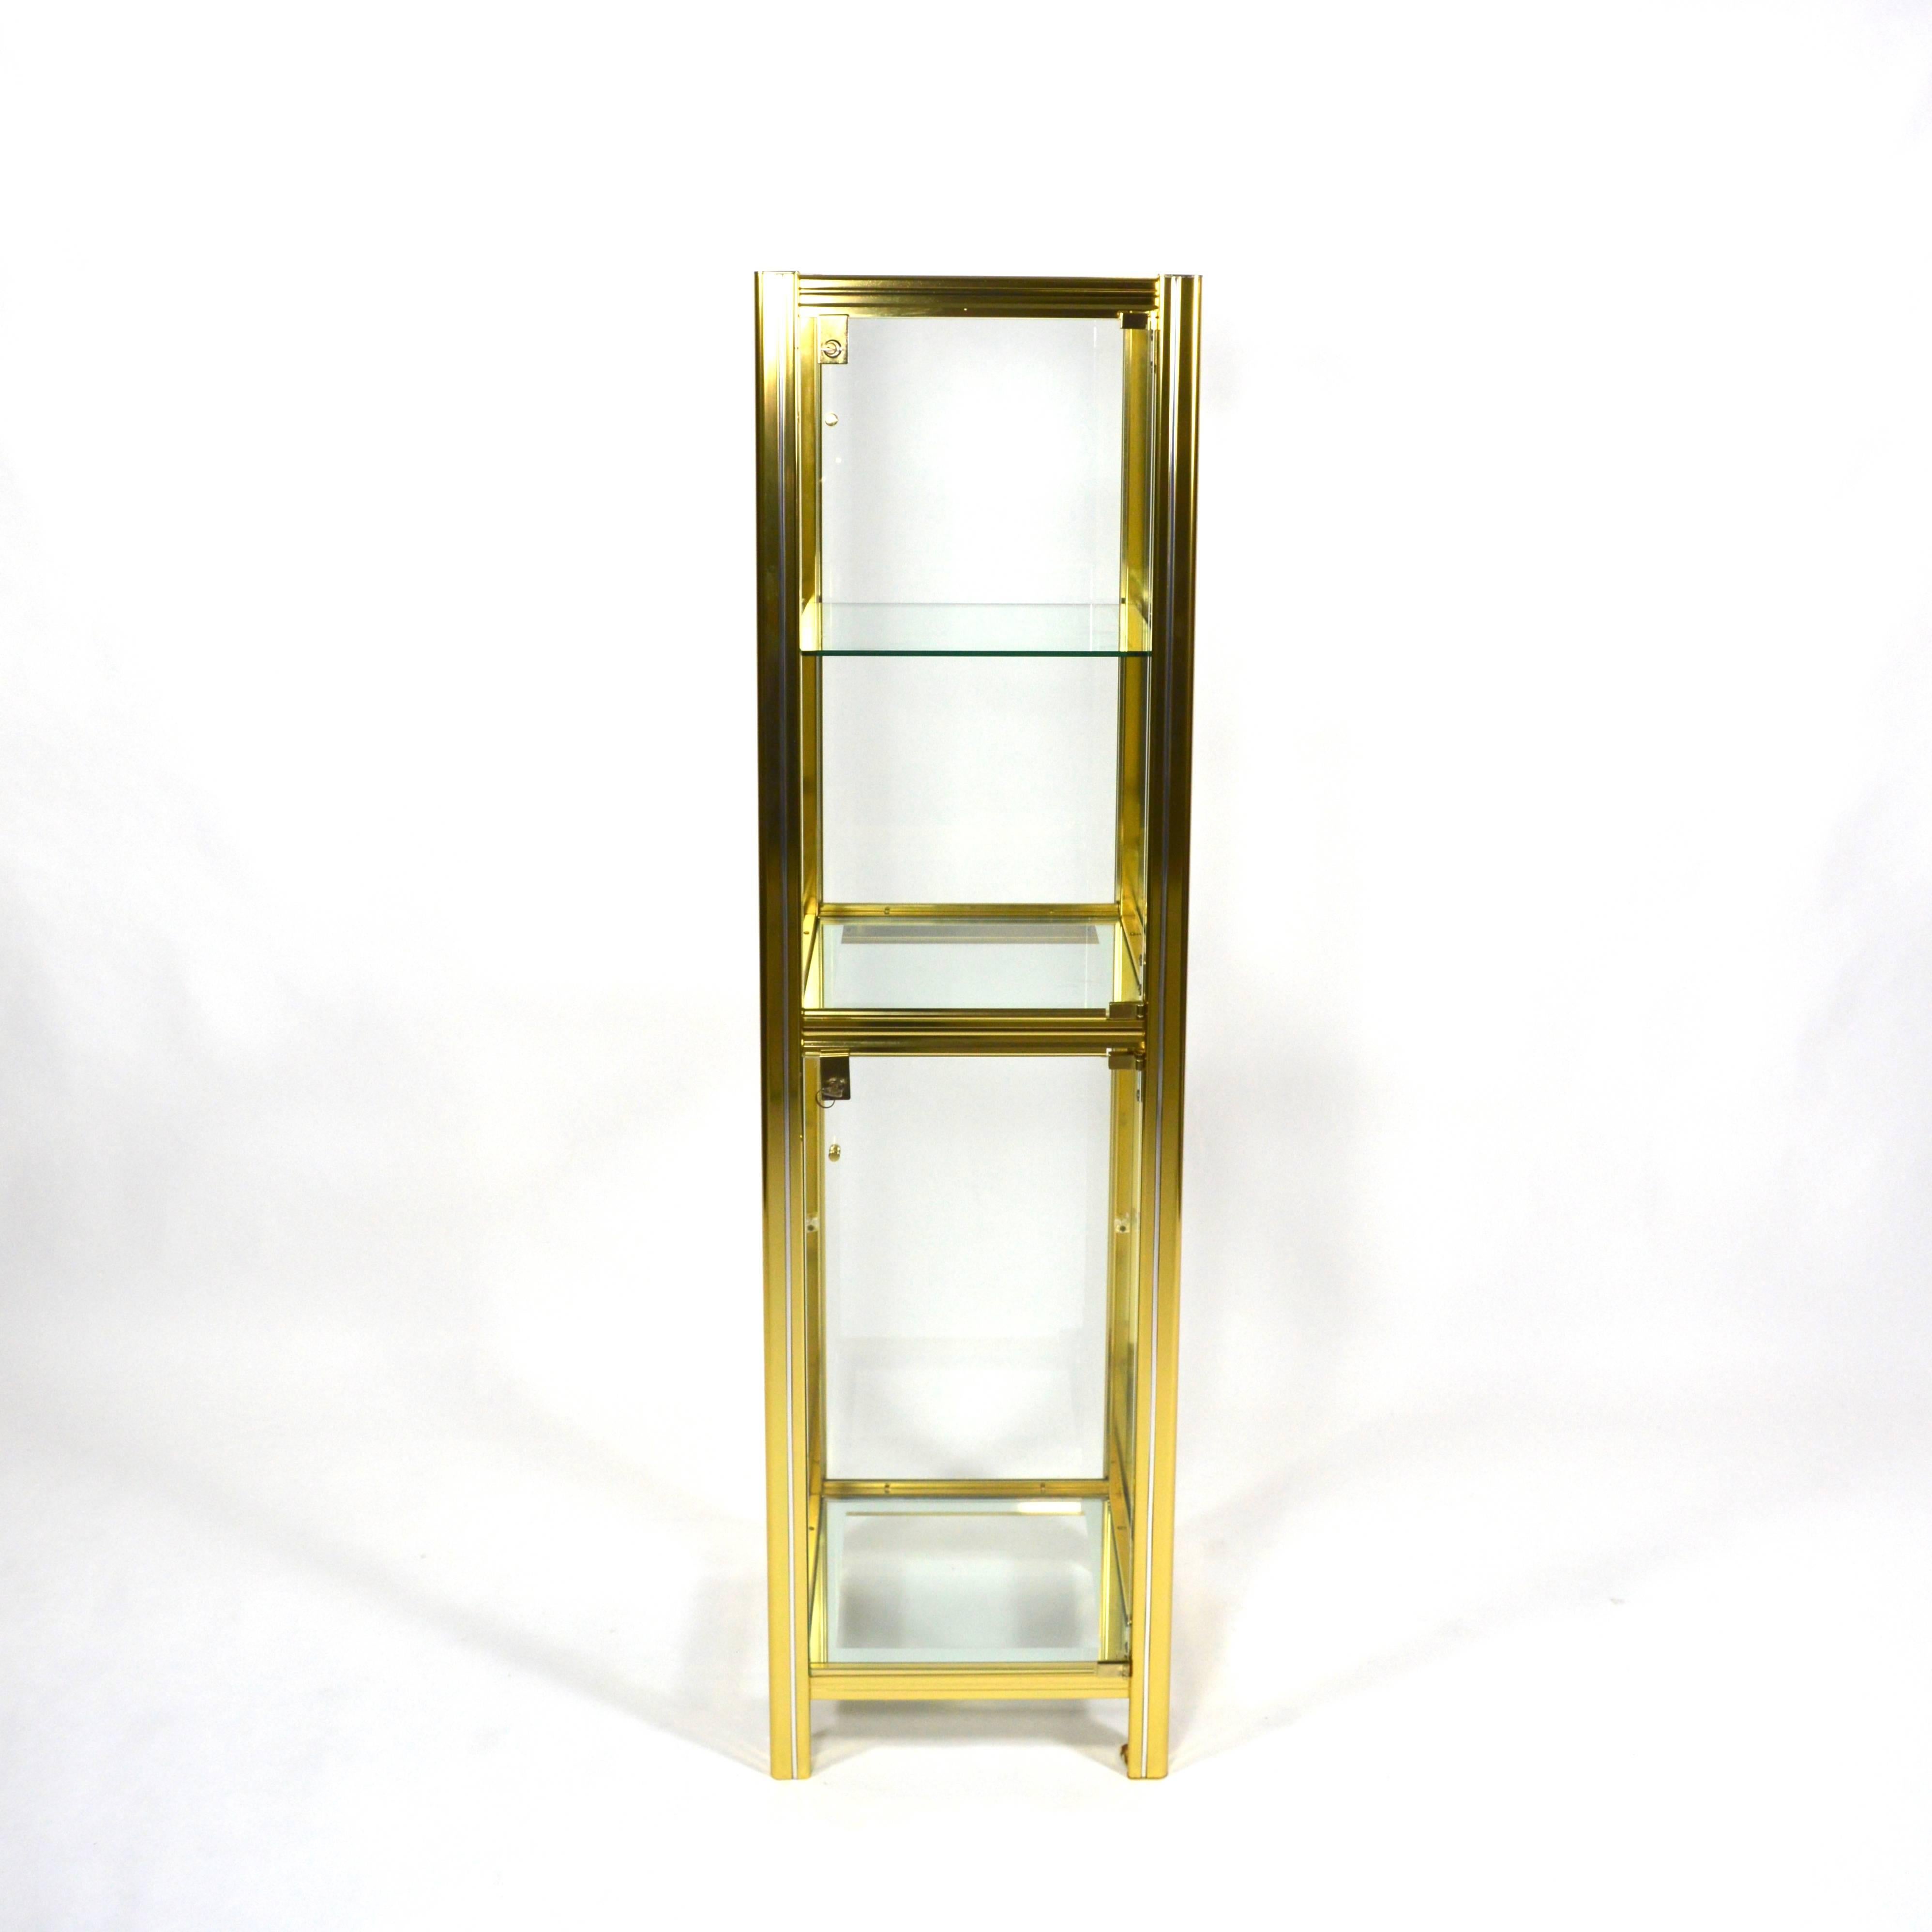 Beautiful Italian showcase made of brass with chrome details.
This vitrine has two doors that can be locked separate.
In excellent condition but the lower glass shelve is replaced by a new one (this glass shelve is not shown in the